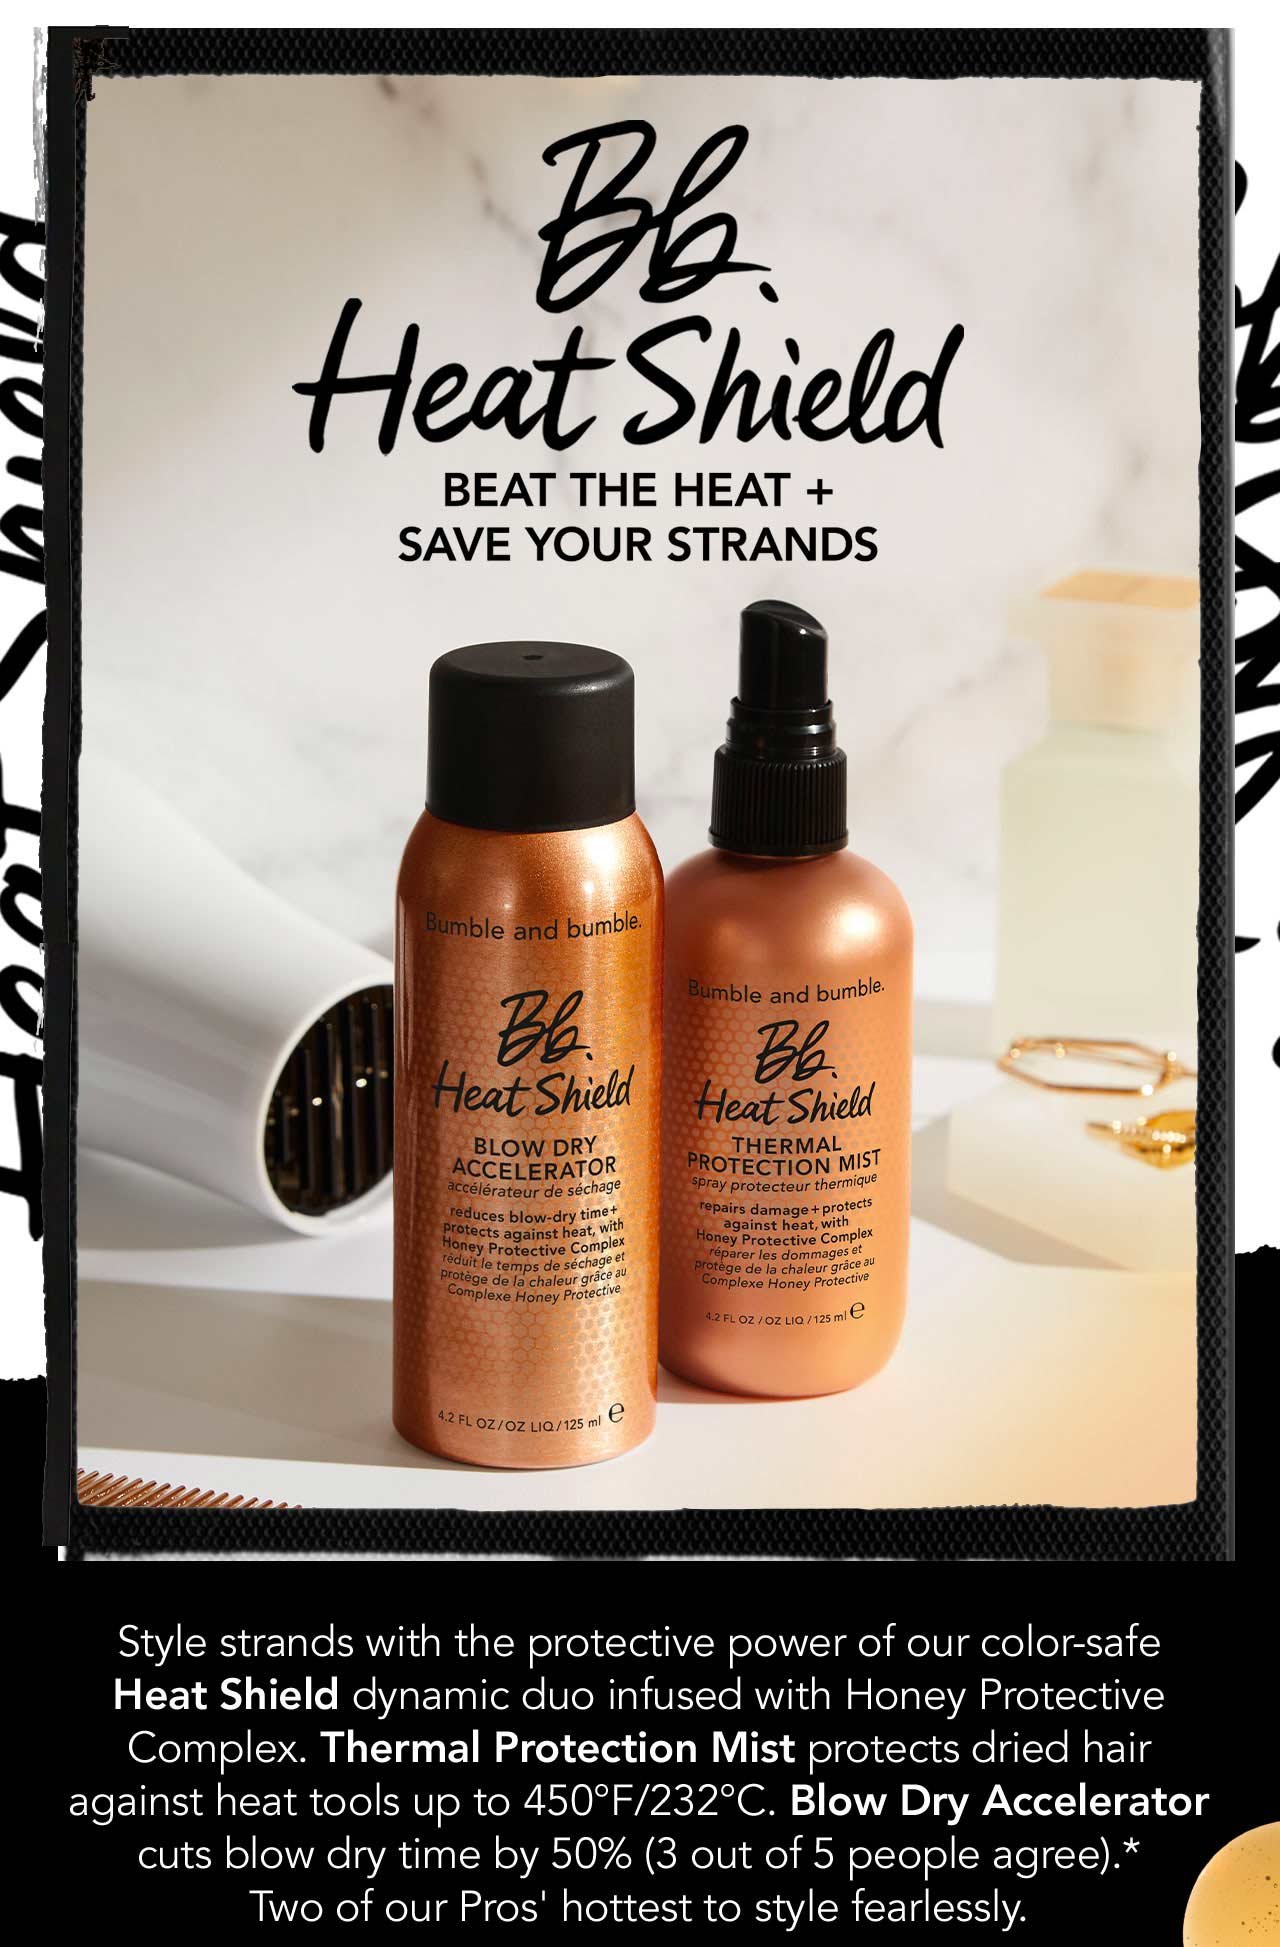 Bb. Heat Shield | BEAT THE HEAT PLUS SAVE YOUR STRANDS | Style strands with the protective power of our color-safe Heat Shield dynamic duo infused with Honey Protective Complex. Thermal Protection Mist protects dried hair against heat tools up to 450°F/232°C. Blow Dry Accelerator cuts blow dry time by 50% (3 out of 5 people agree).* Two of our Pros' hottest to style fearlessly. | Based on a consumer sensory study after one use.